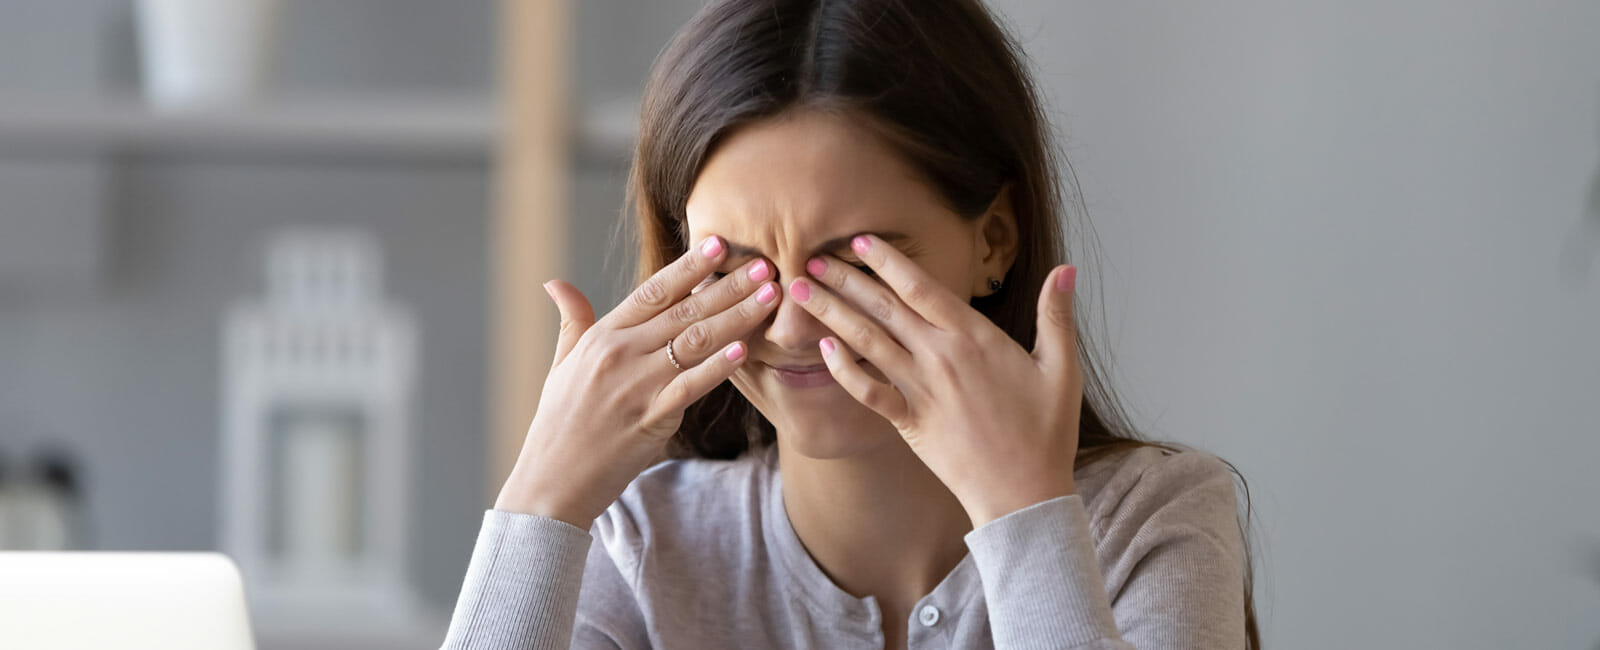 A young woman rubbing her eyes in discomfort